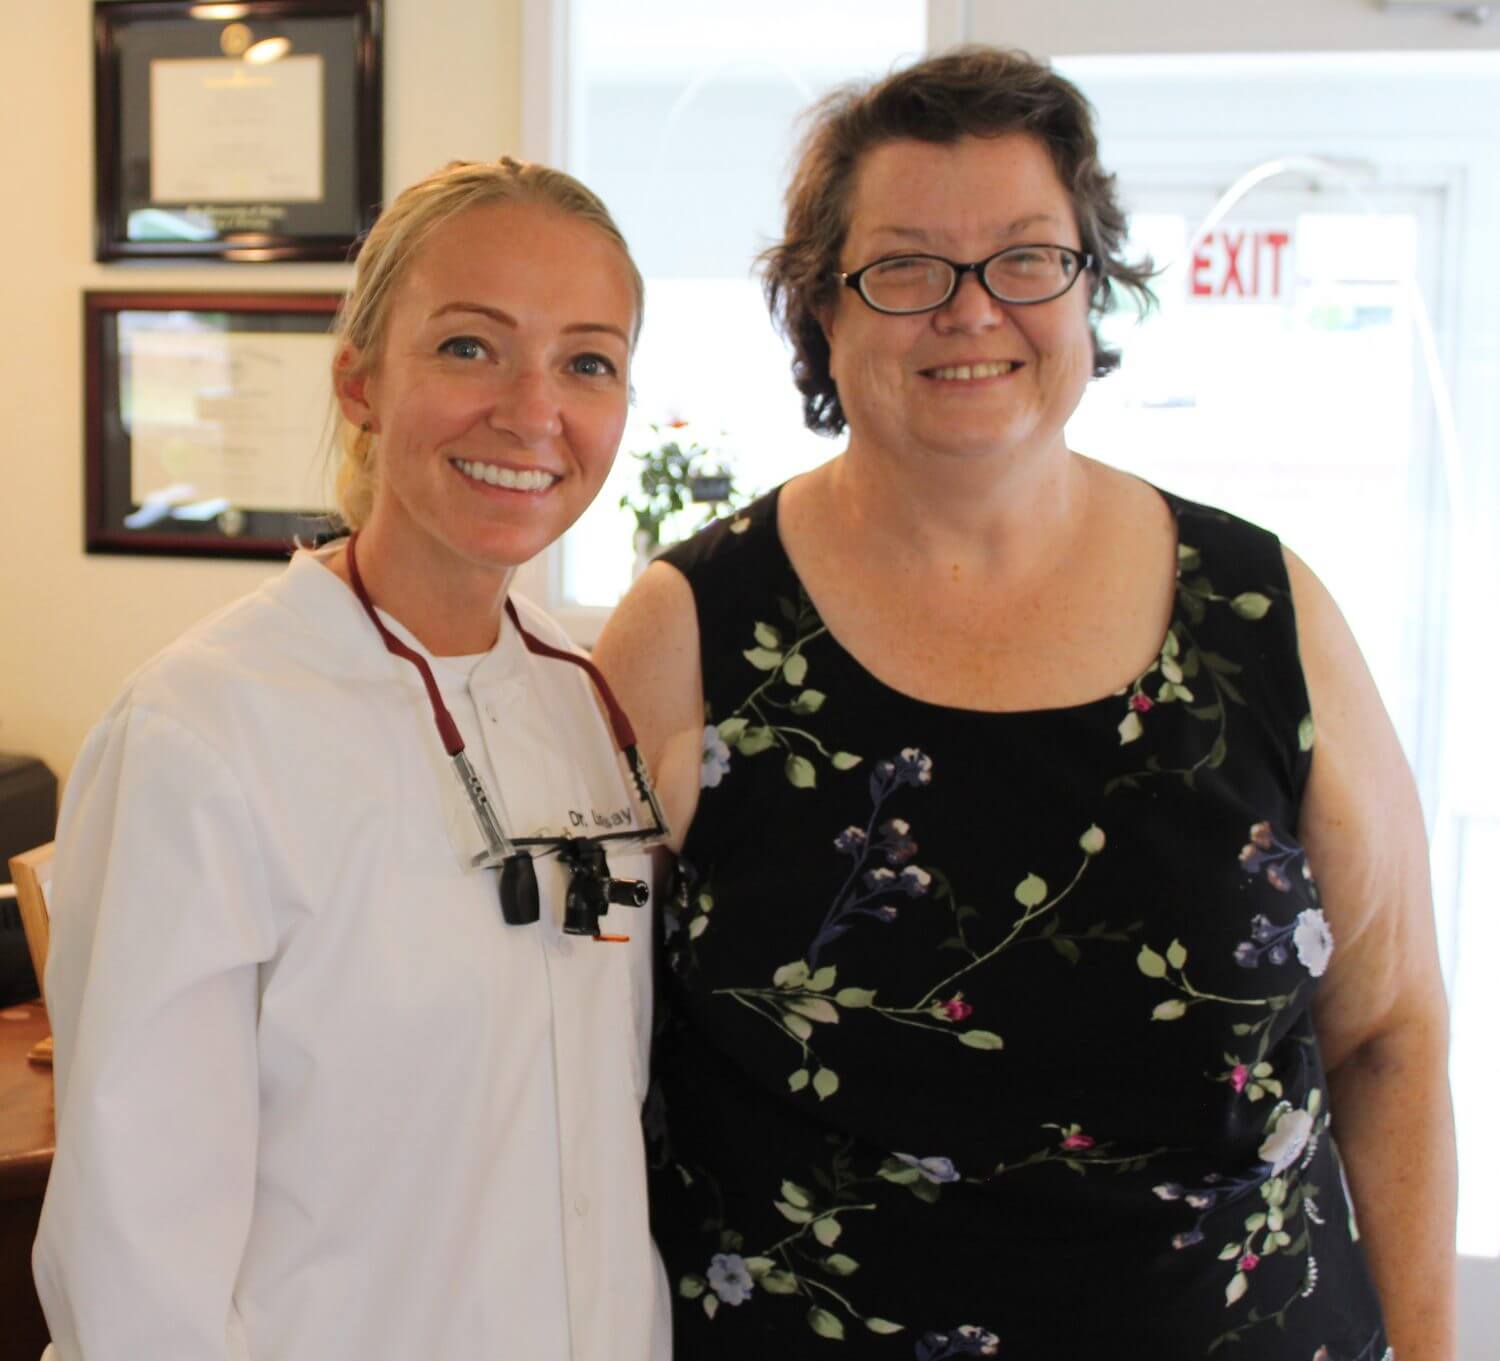 DLN Success Story – Patient with Disabilities Gets Much Needed Dental Care!